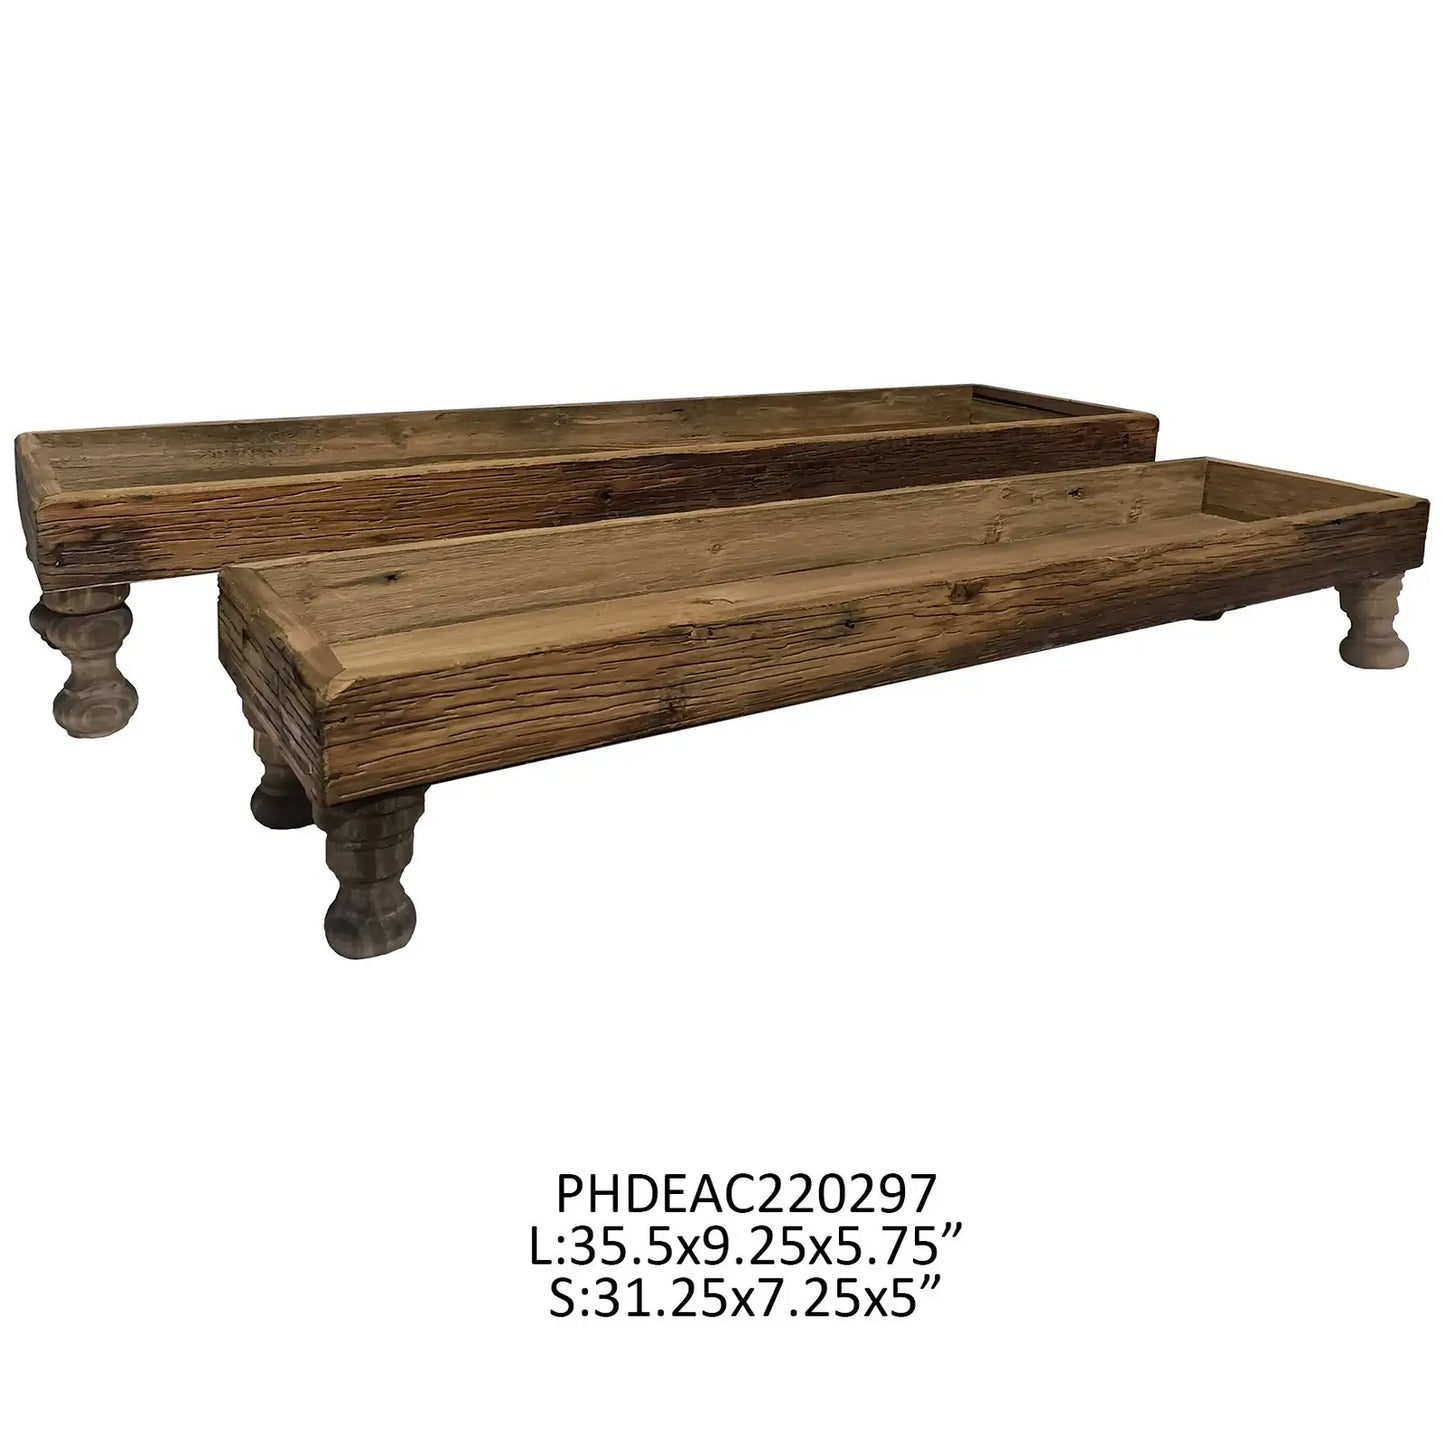 Wooden Serving Trays on Turned Legs - 2 Sizes Available